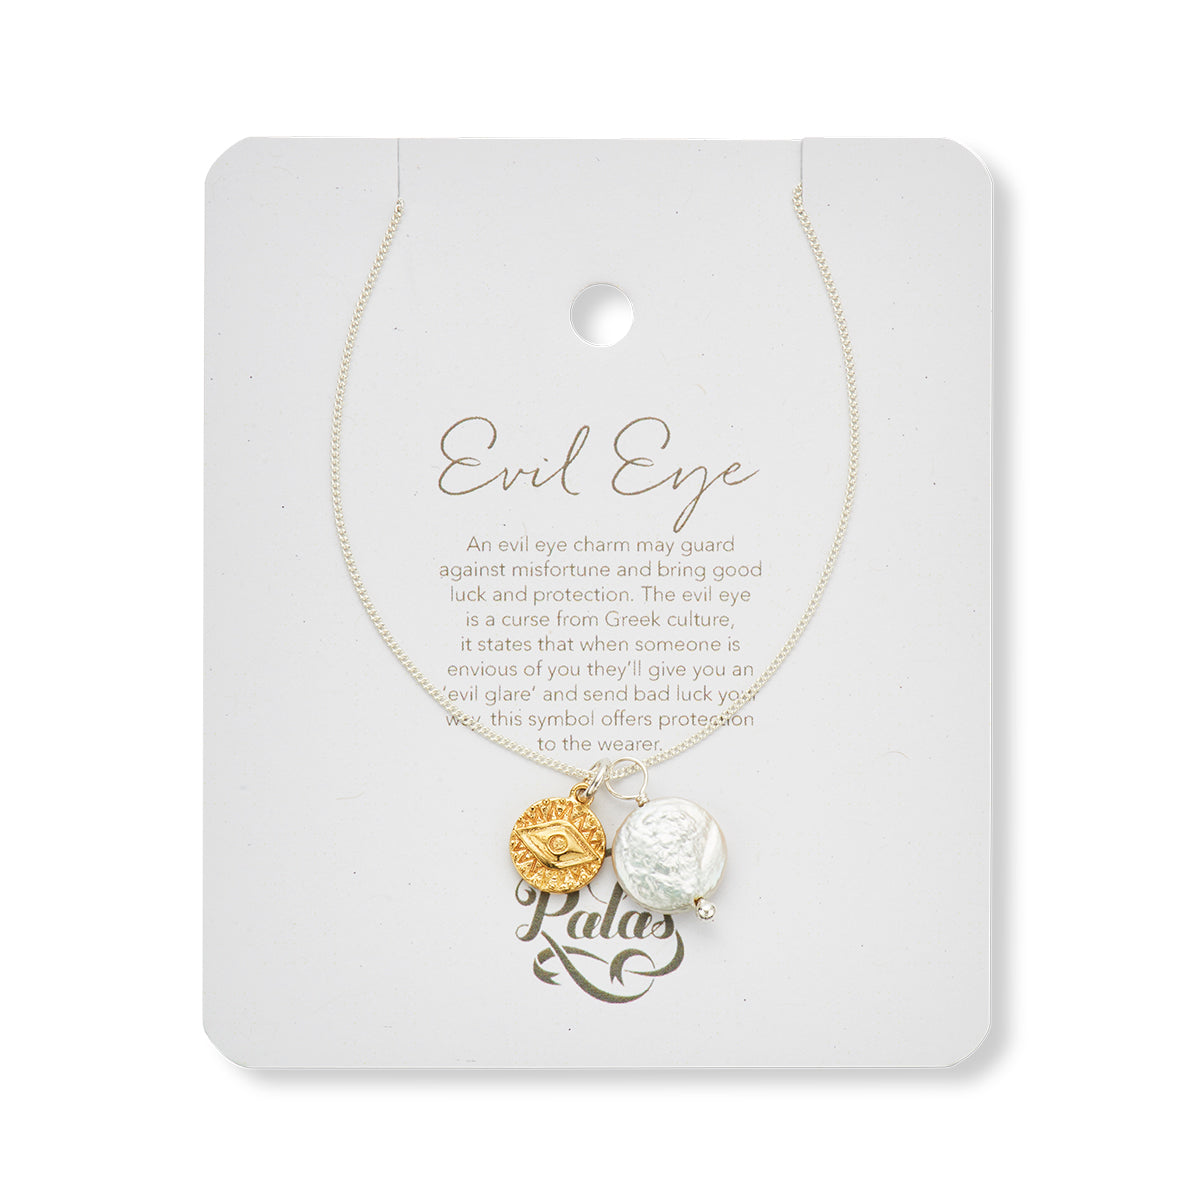 Evil eye and pearl amulet necklace